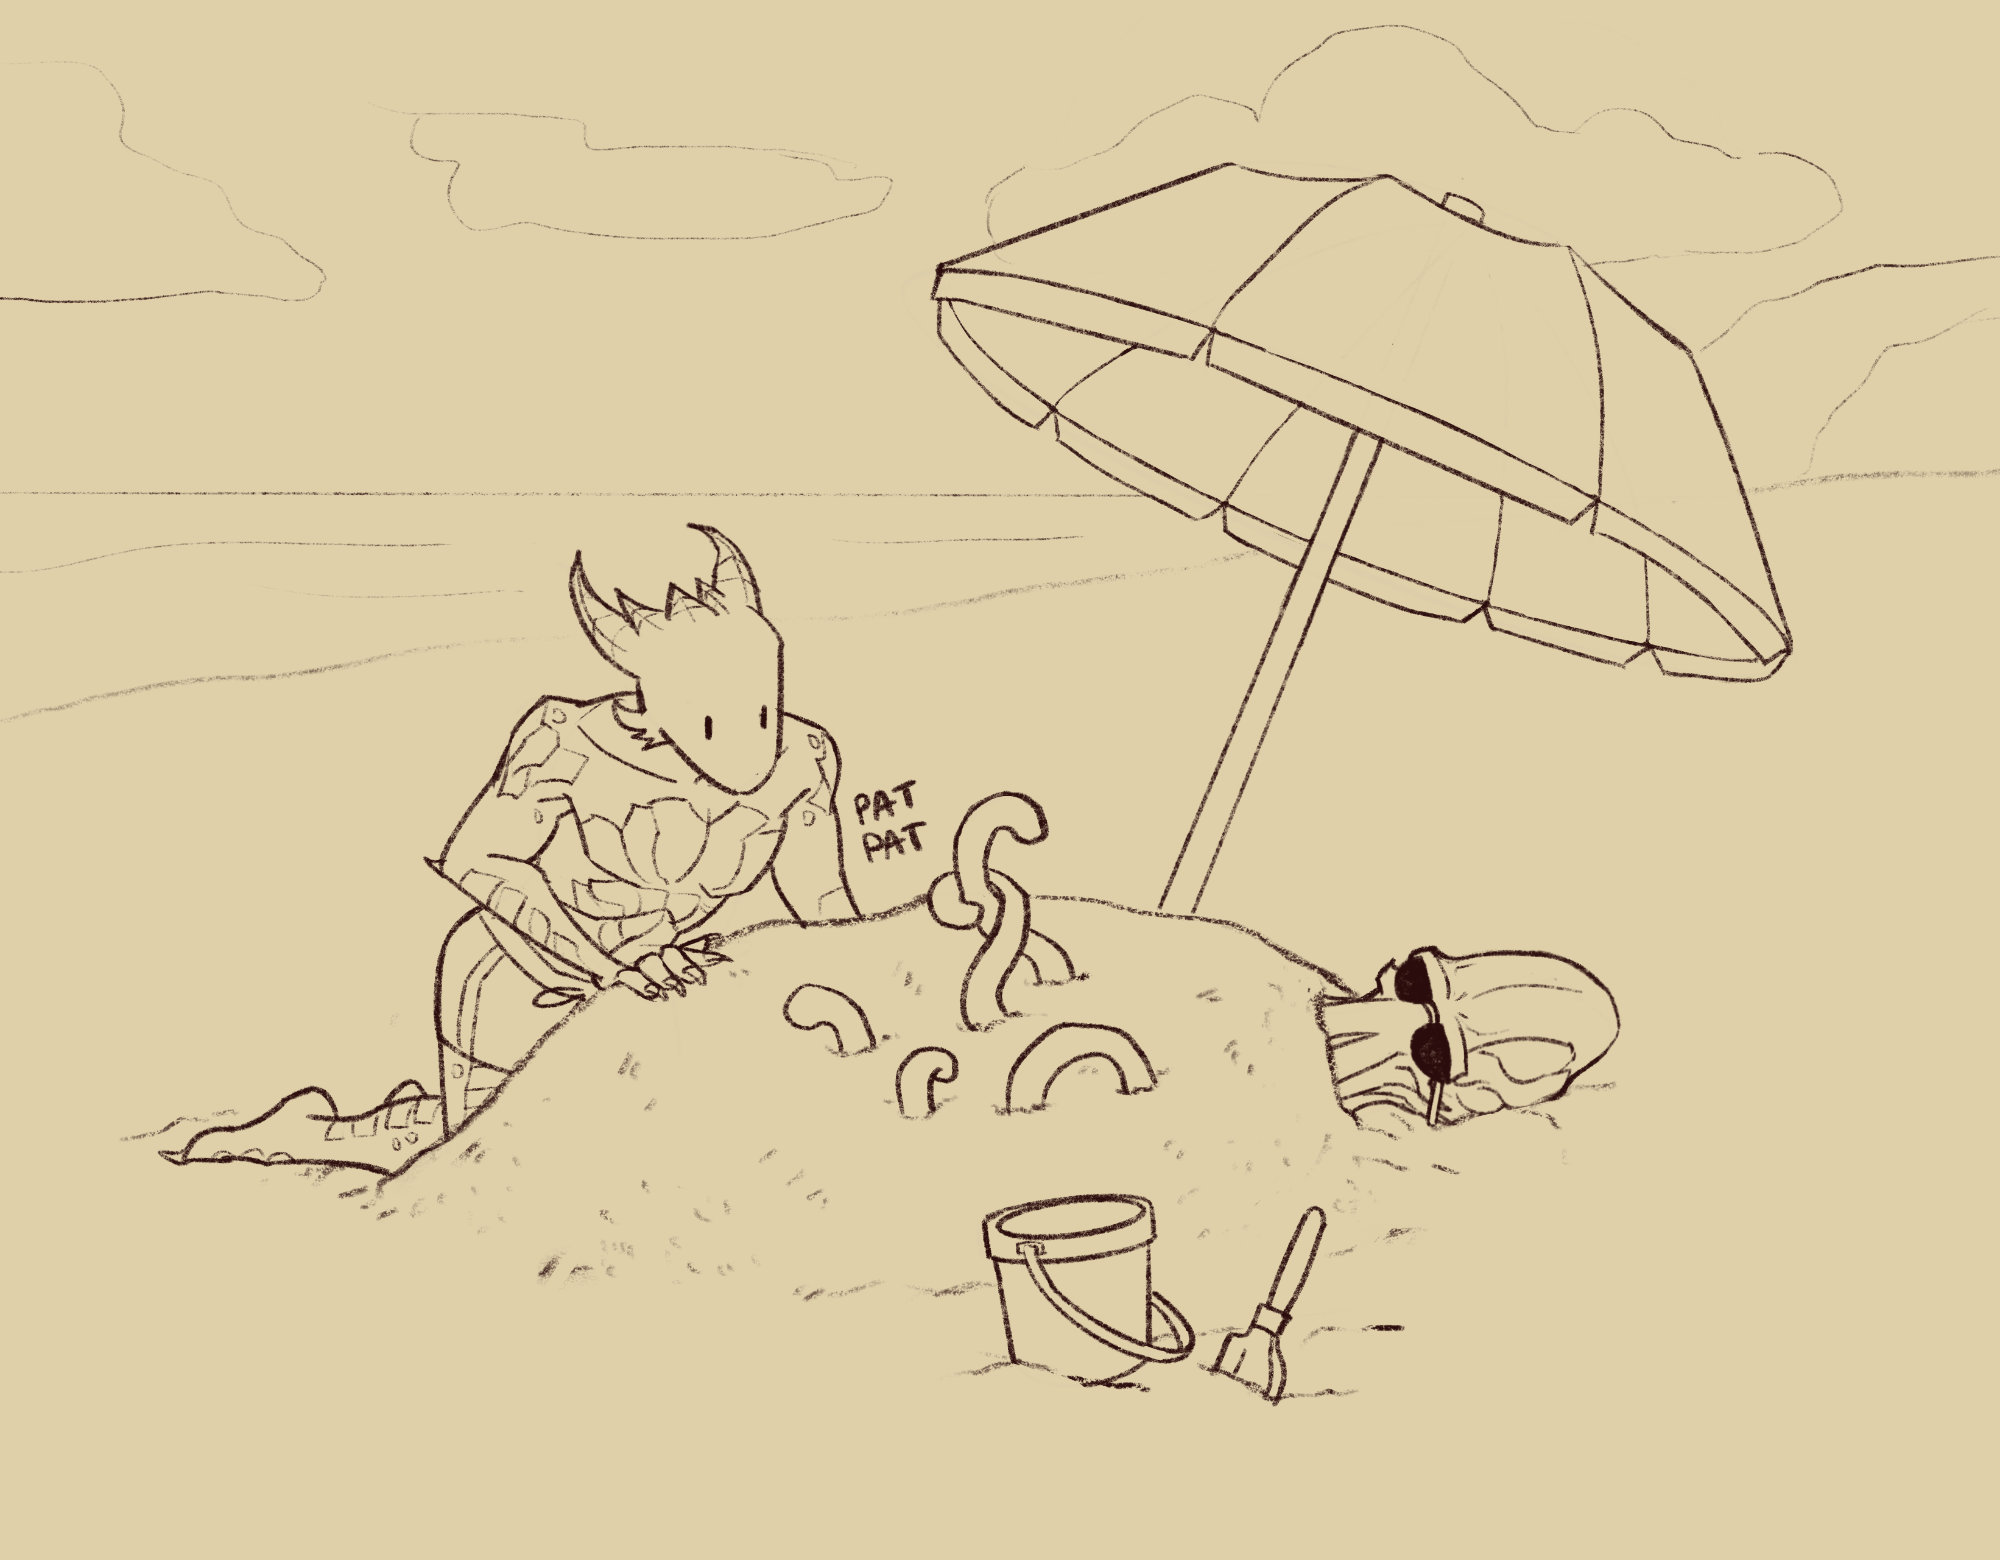 Daamric (a bronze Dragonborn) and the Emperor are at the beach. The Emperor is buried under a sand pile with its tentacles sticking out in the middle, while Daamric is patting the sand pile. There's a giant beach umbrella shading the Emperor.